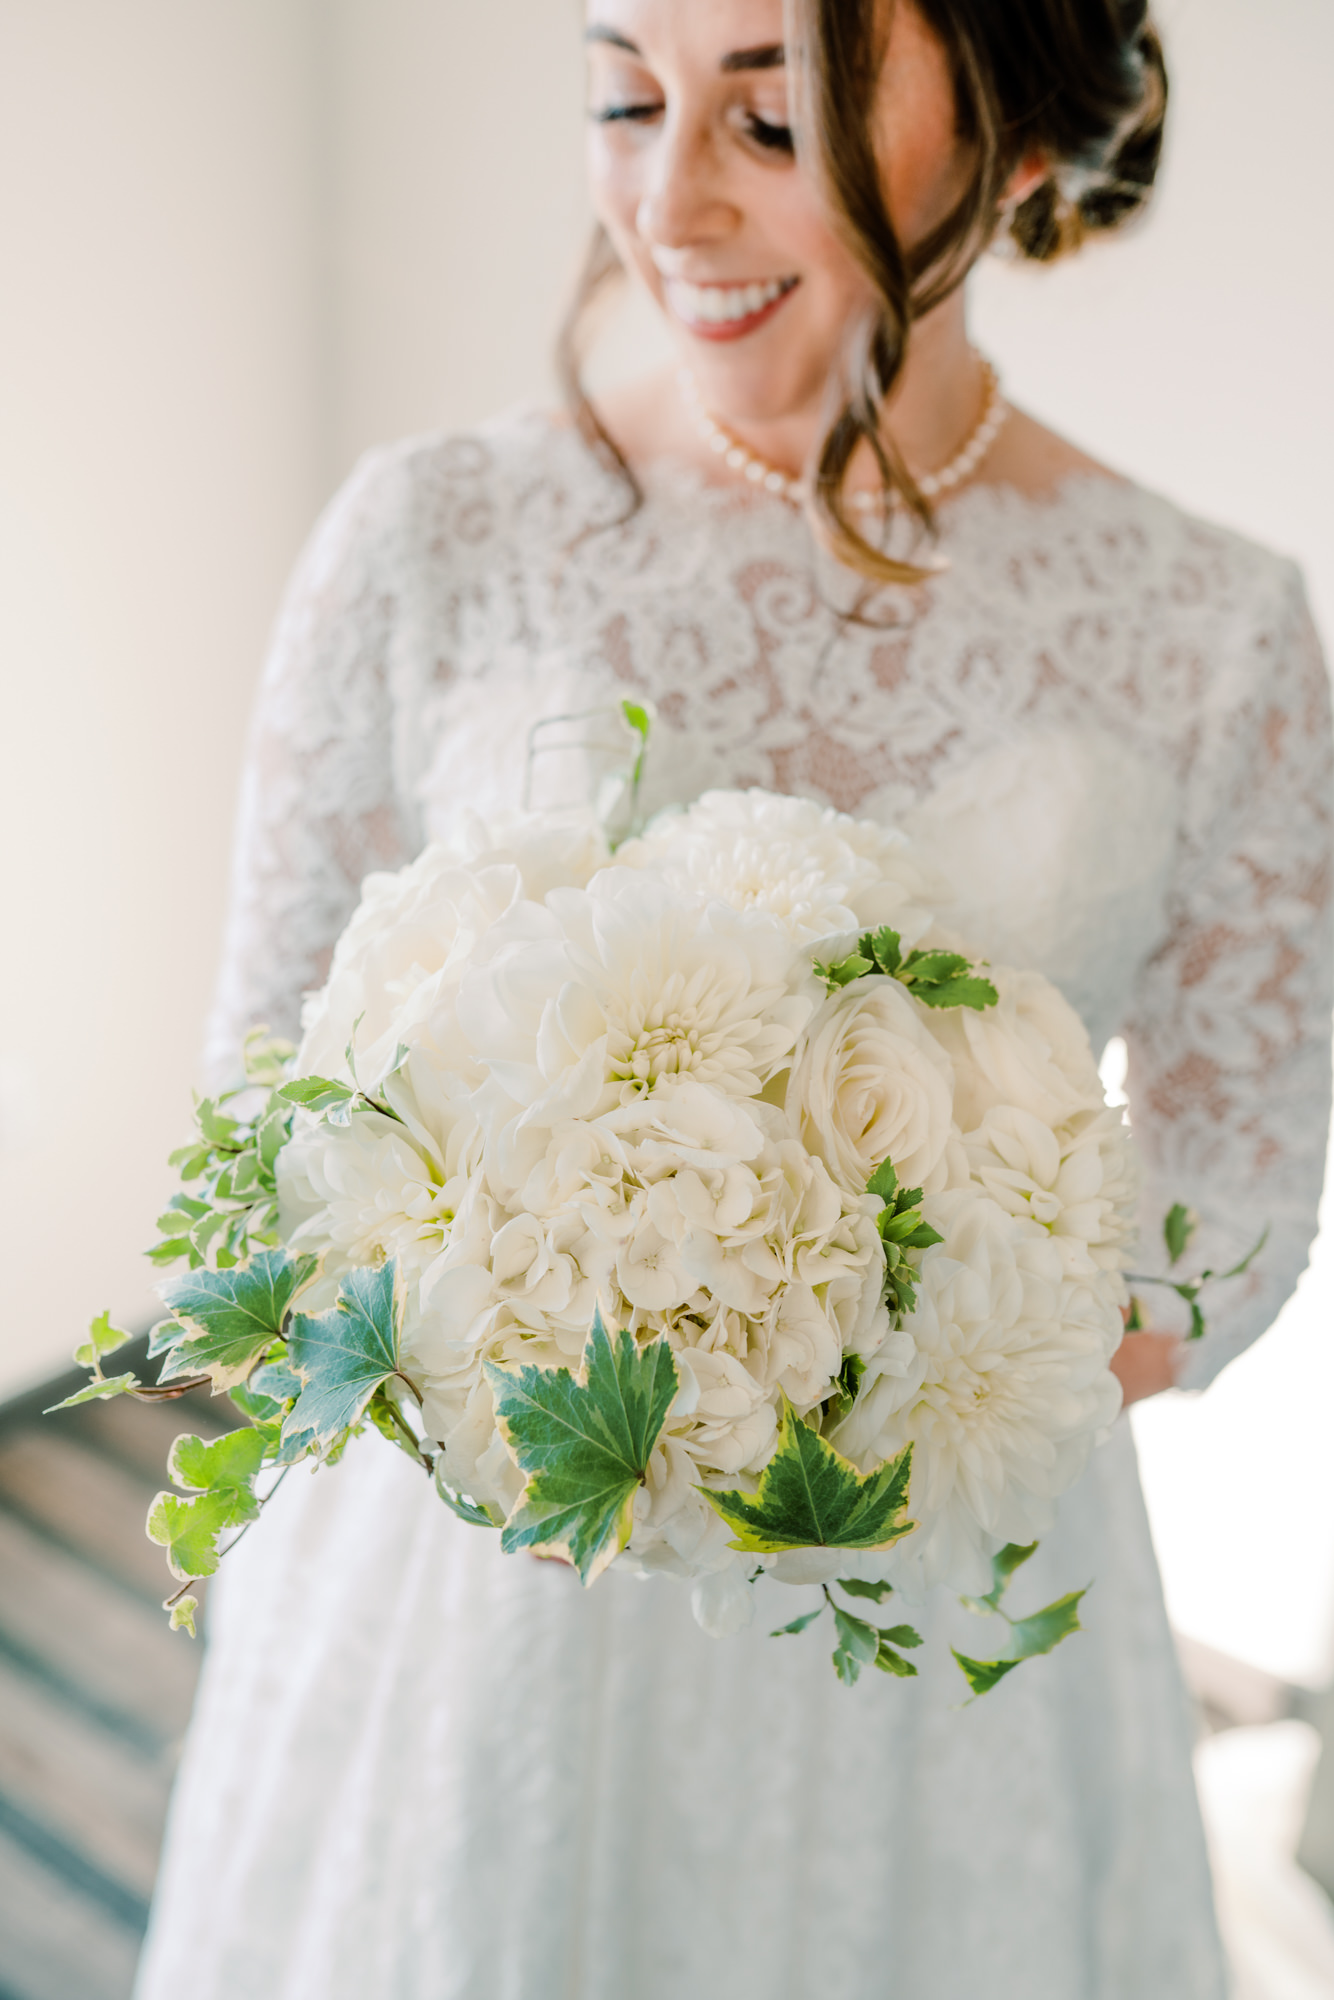 Bride Lauren with her beautiful white and green bouquet